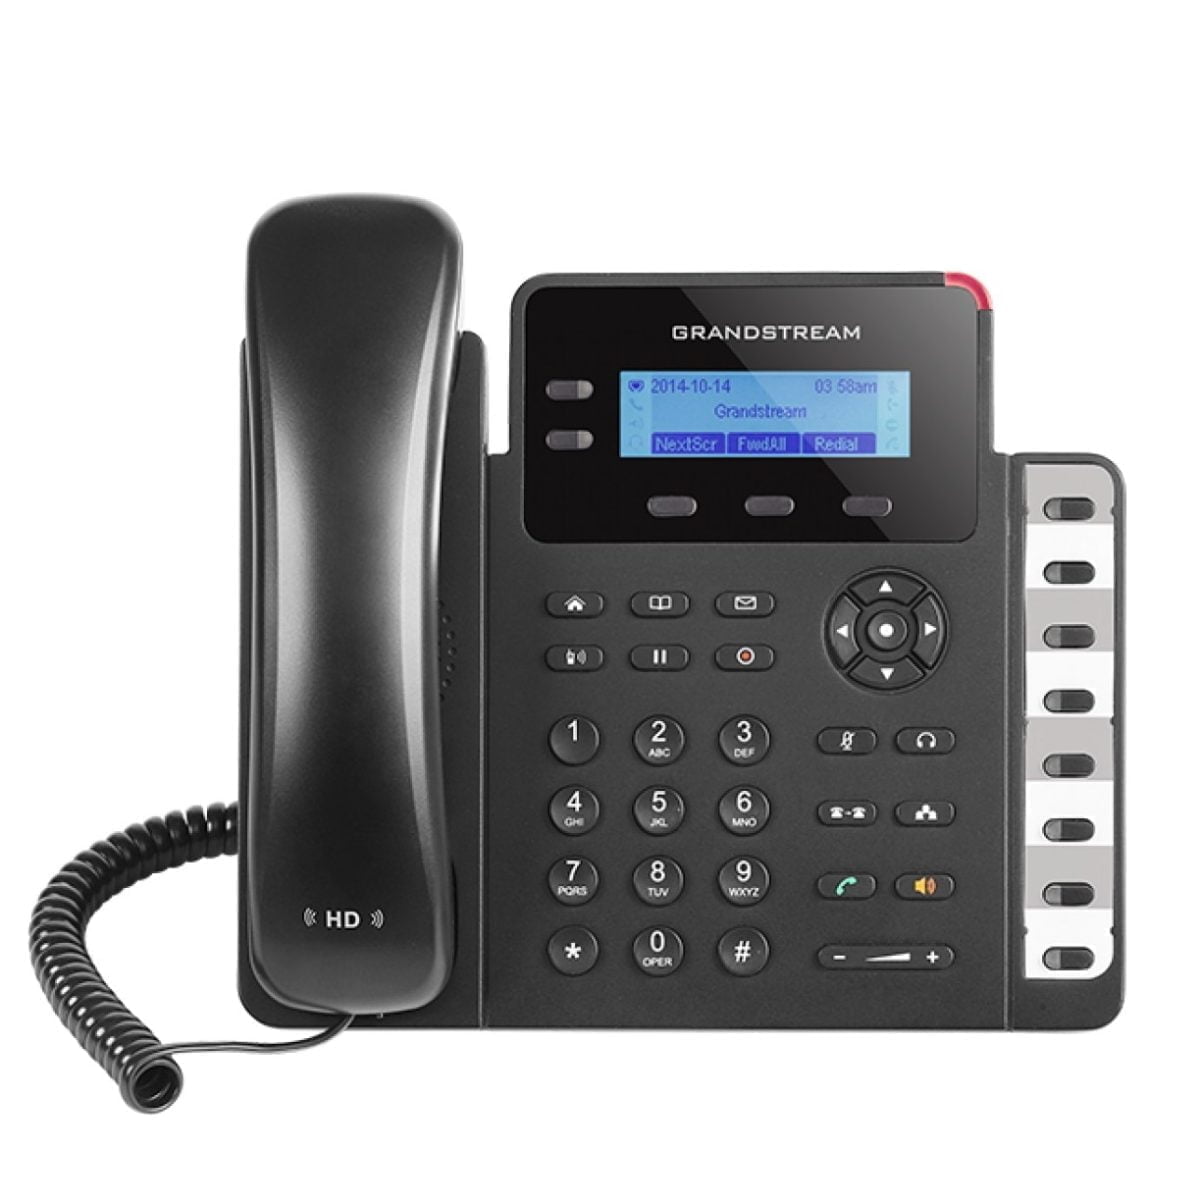 Grandstream &Amp;Lt;H1 Class=&Amp;Quot;Title Page-Title&Amp;Quot;&Amp;Gt;Grandstream Gxp1628&Amp;Lt;/H1&Amp;Gt; The Gxp1628 Brings An Efficient Call Environment To Any Desktop. This Phone Delivers A An Easy-To-Use Interface And Simple Design With Its 132X48 Backlit Lcd Screen, 2-Line/Sip Account Keys And 8 Dual-Color Lcd Blf/Speed-Dial Keys. Also Equipped With Dual Gigabit Ports With Integrated Poe, The Gxp1628 Is Built For A Variety Of Deployment Scenarios. Added Customization And Usability Comes With Its Built In Hd Audio And 3 Xml Programmable Soft Keys.as All Grandstream Ip Phones Do, The Gxp1628 Features State-Of-The-Art Security Encryption Technology (Srtp And Tls). The Gxp1628 Supports A Variety Of Automated Provisioning Options, Including Zero-Configuration With Grandstream?S Ucm Series Ip Pbxs, Encrypted Xml Files And Tr-069, To Make Mass Deployment Extremely Easy. Features2 Sip Accounts, 2 Line Keys, 3-Way Conferencing, 3 Xml Programmable Context-Sensitive Soft Keys Hd Audio On Speakerphone And Handset Dual-Switched Gigabit Ports, Integrated Poe 8 Dual-Colored Blf/Speed Dial Keys Ehs Support For Plantronics Headsets Up To 1000 Contacts, Call History Up To 200 Records Grandstream Gxp1628 Grandstream Gxp1628